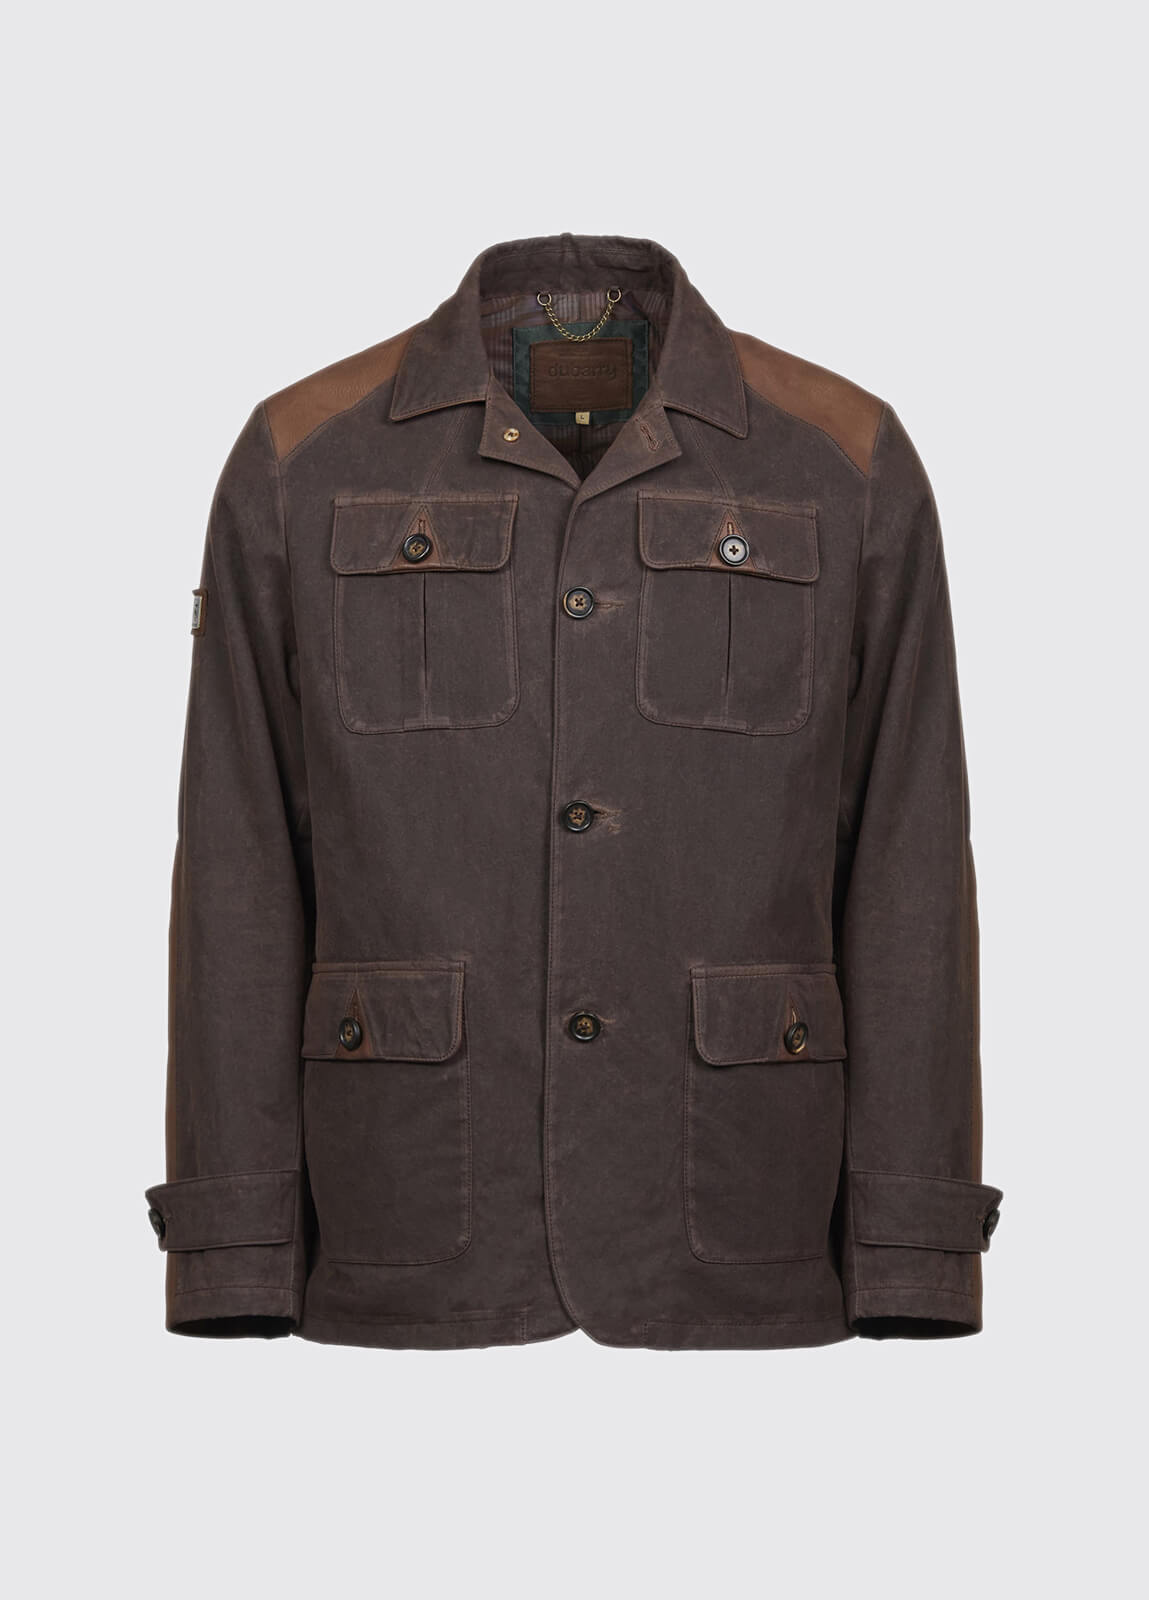 Glenview Country Jacket - Old Rum